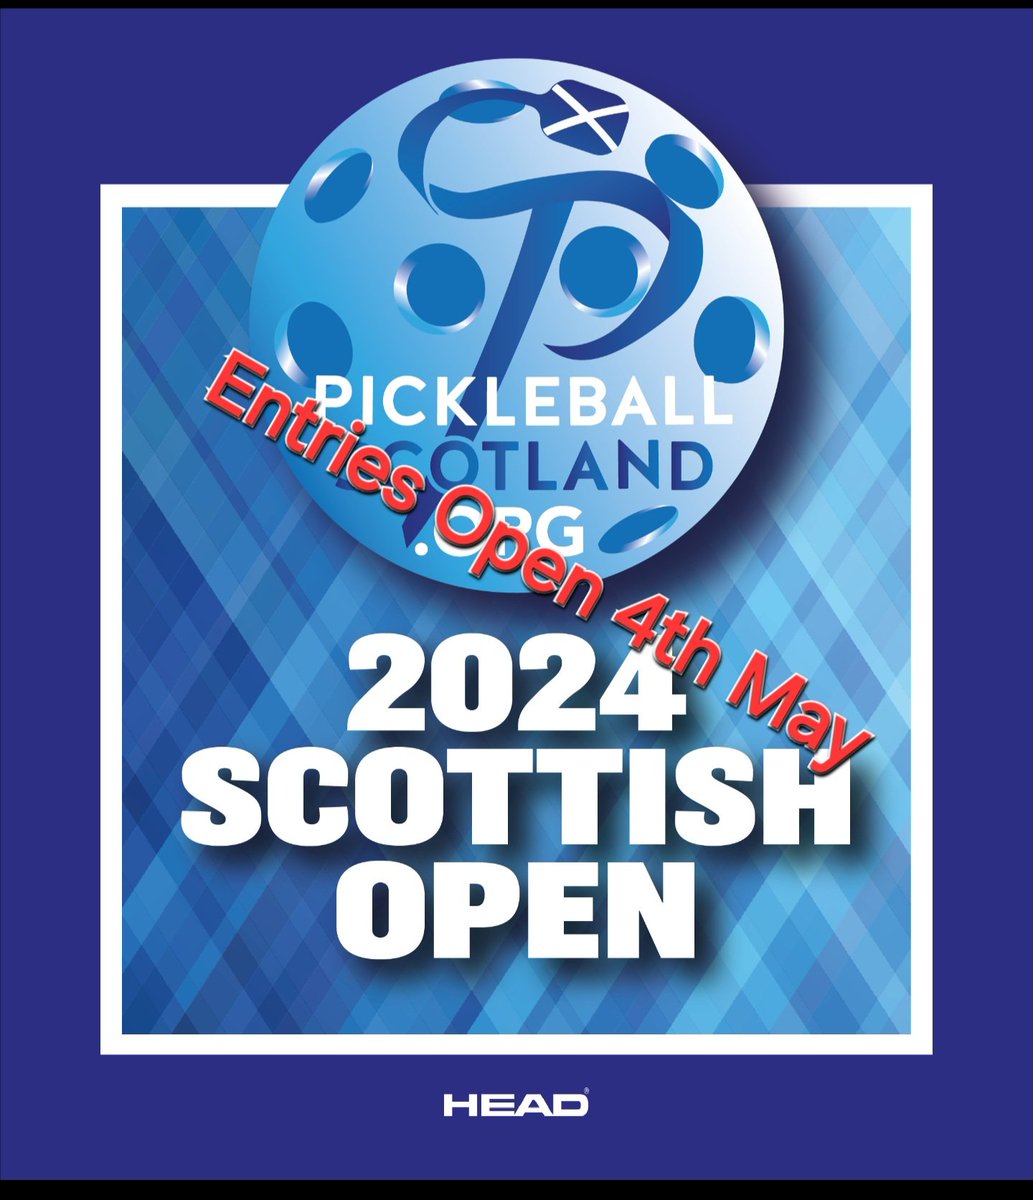 The 3rd Pickleball Scotland Scottish Open will be held on the 3rd-6th October 2024 in the National Badminton Academy Scotstoun Glasgow Entries Open 4th May at 10am